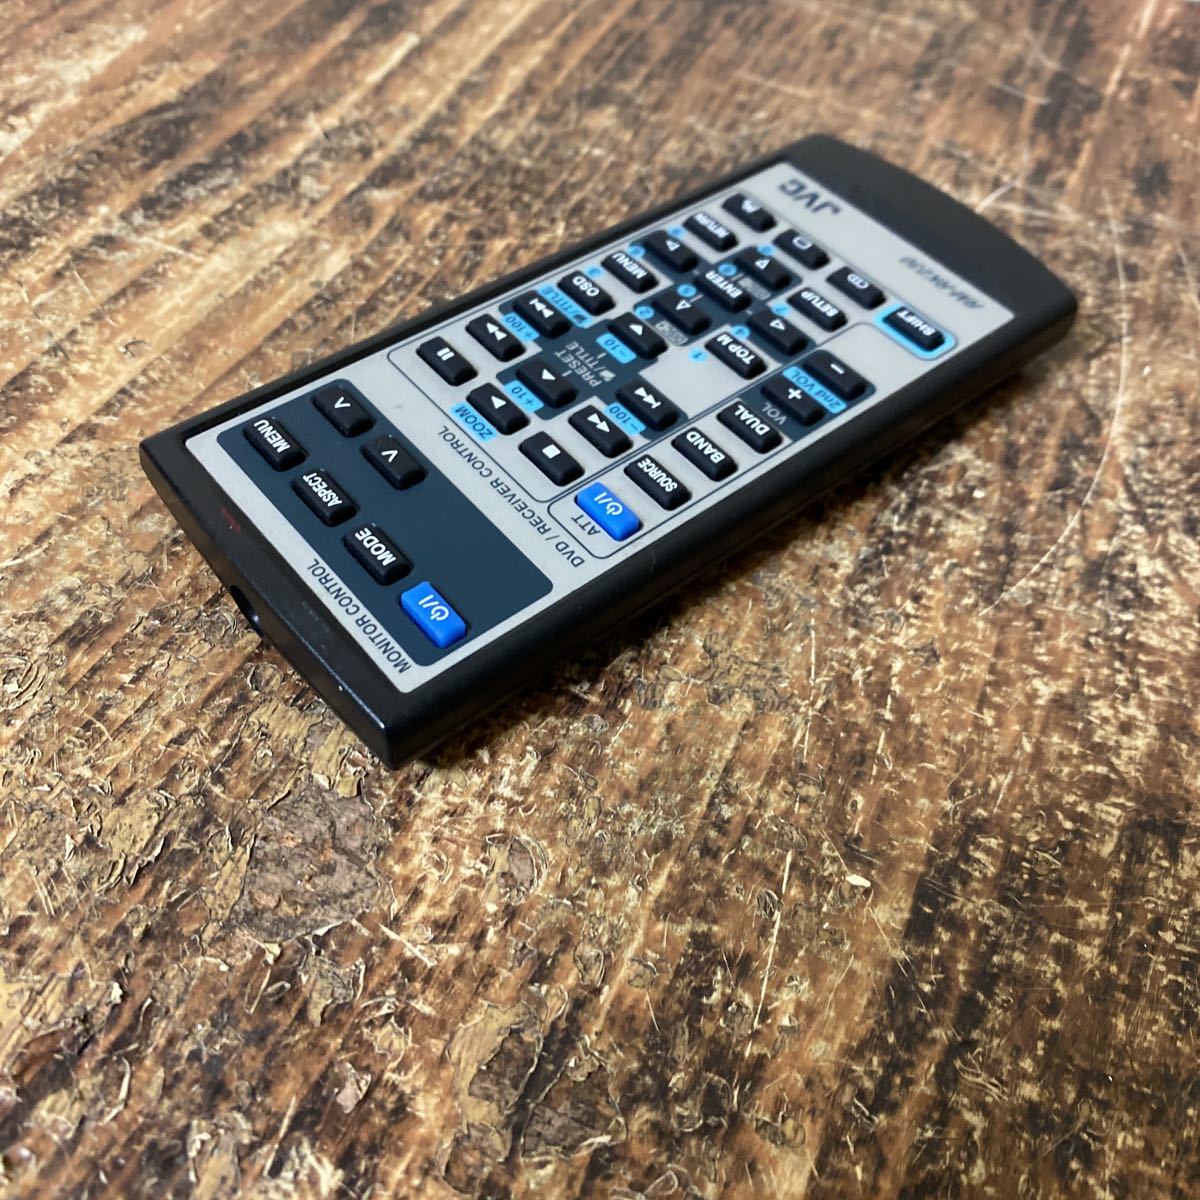 JVC DVD player remote control RM-RK230 operation not yet verification Junk free shipping 